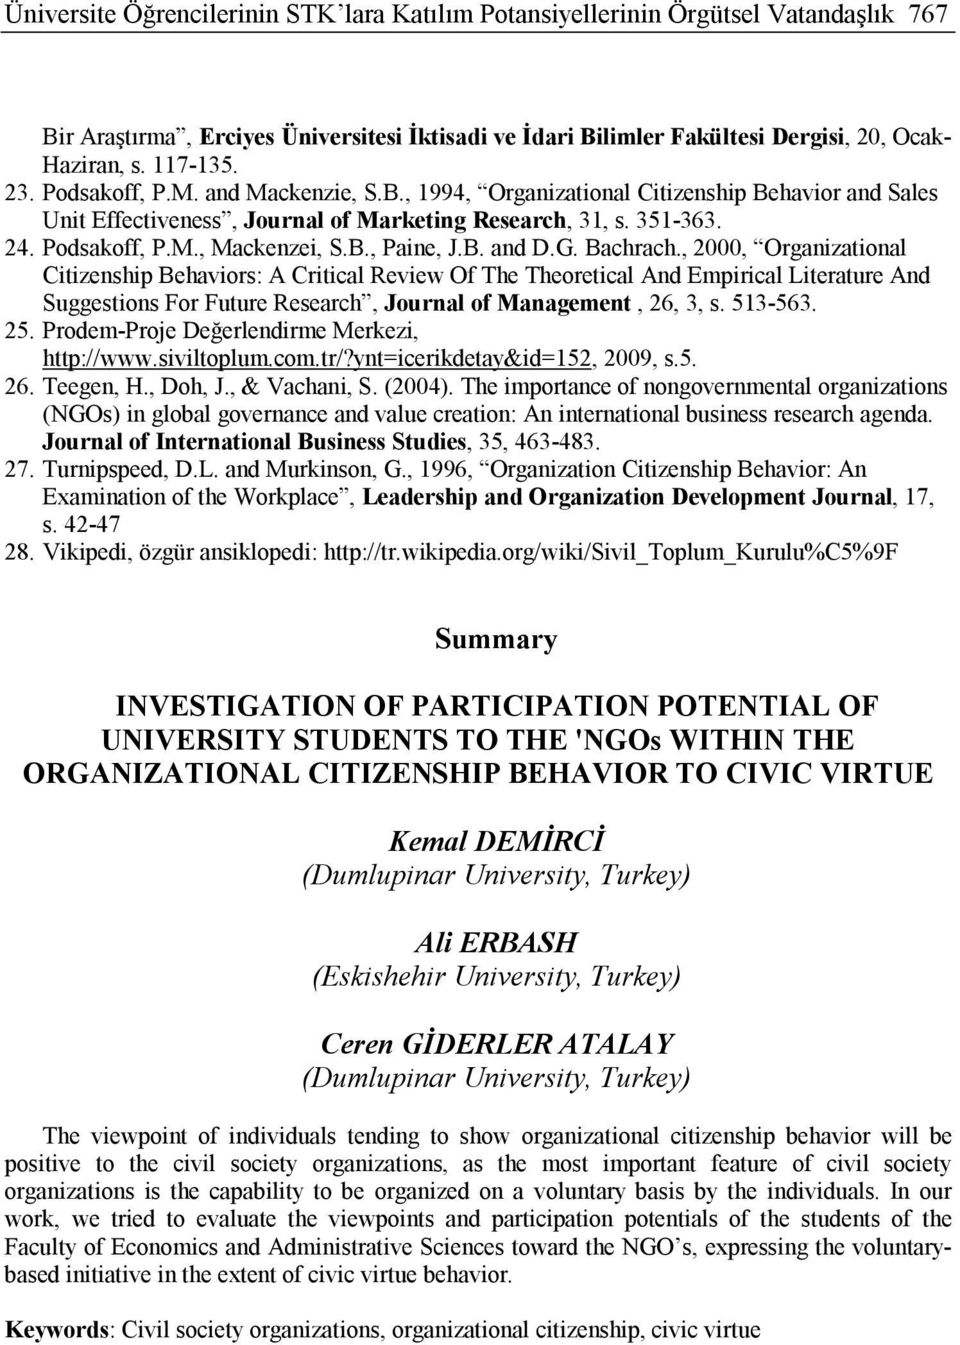 B. and D.G. Bachrach., 2000, Organizational Citizenship Behaviors: A Critical Review Of The Theoretical And Empirical Literature And Suggestions For Future Research, Journal of Management, 26, 3, s.